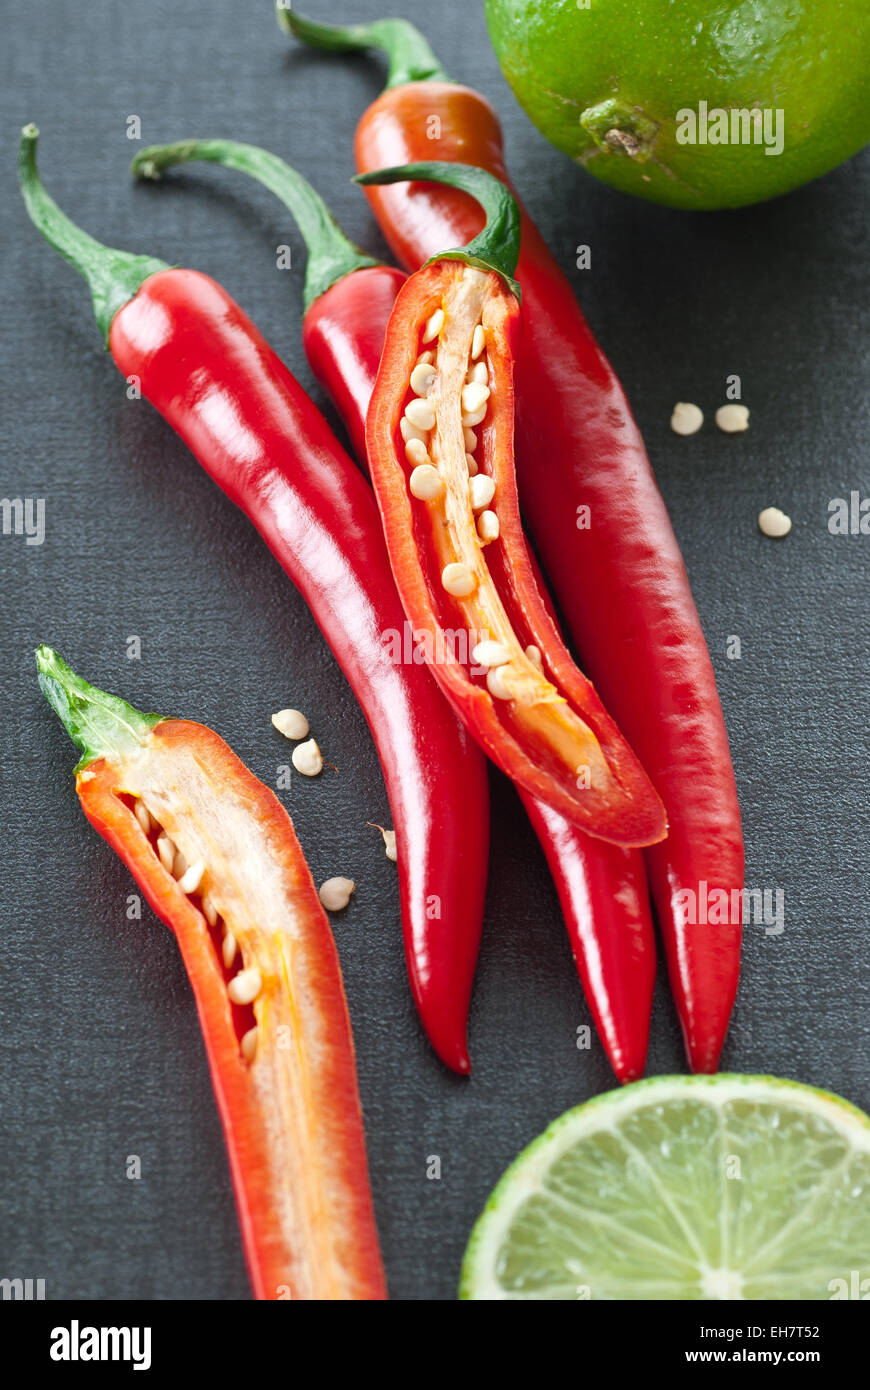 Fresh red chili with lime. Stock Photo